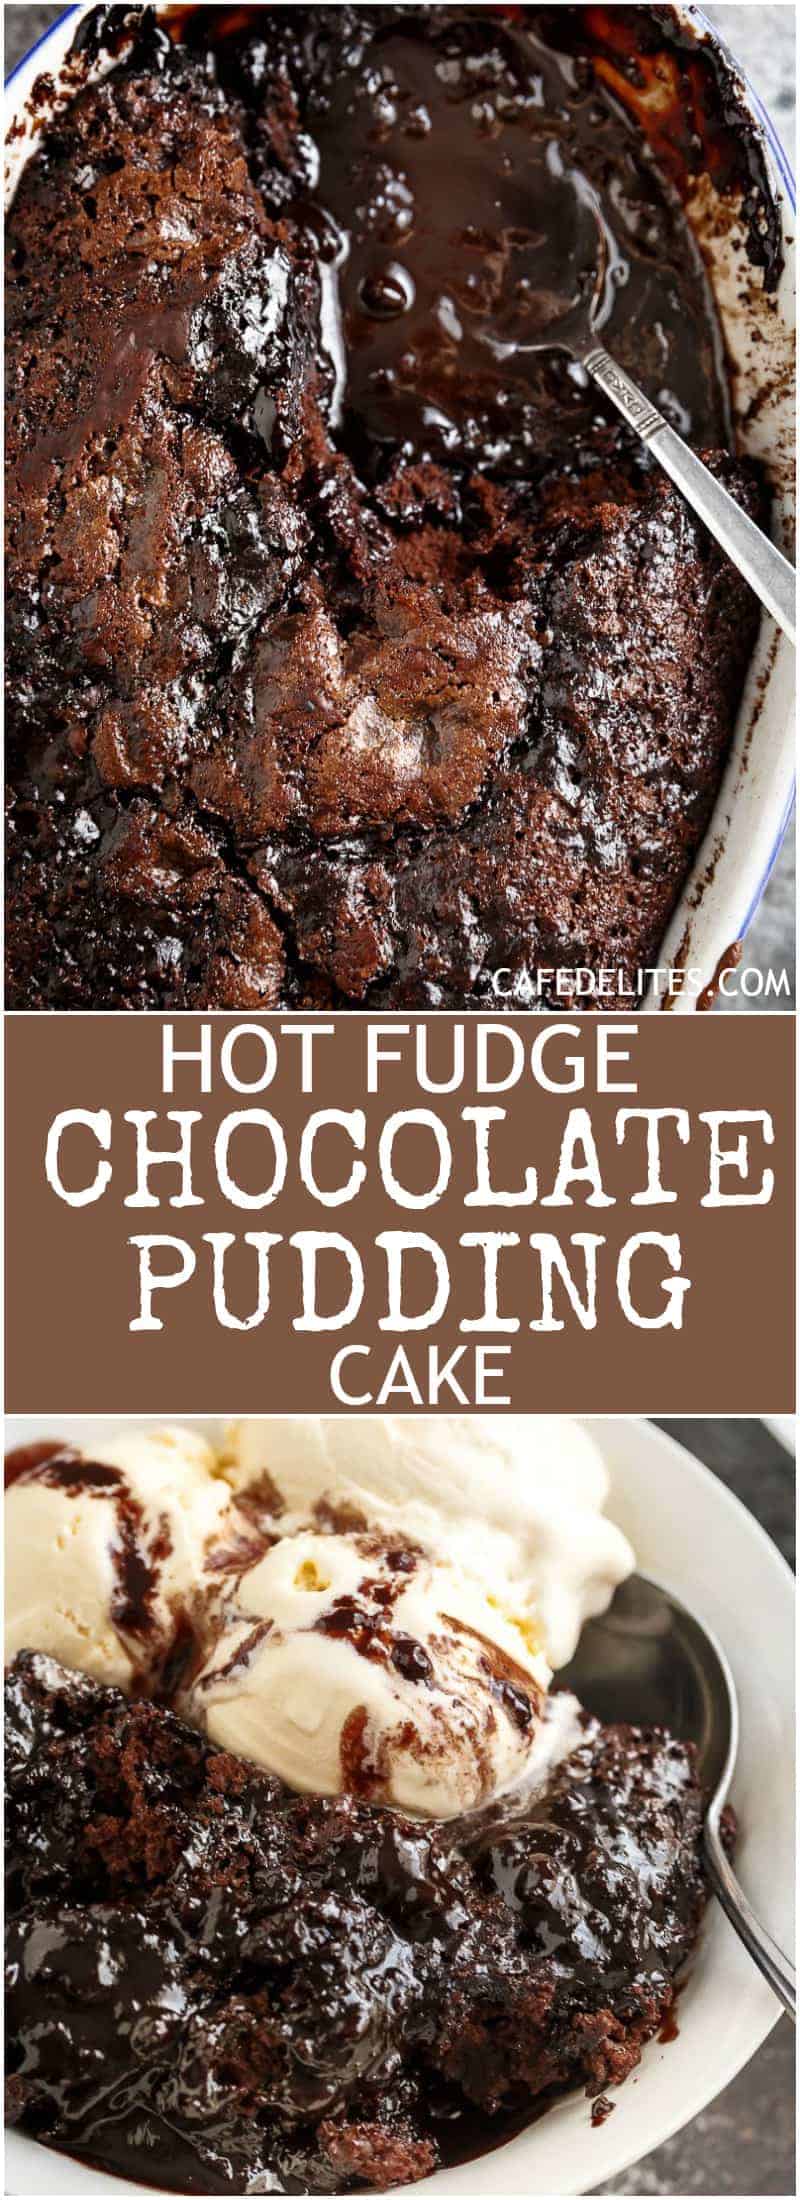 Hot Fudge Chocolate Pudding Cake is extremely easy to make! A rich chocolate fudge sauce forms underneath a layer of chocolate cake while baking, by itself! | https://cafedelites.com